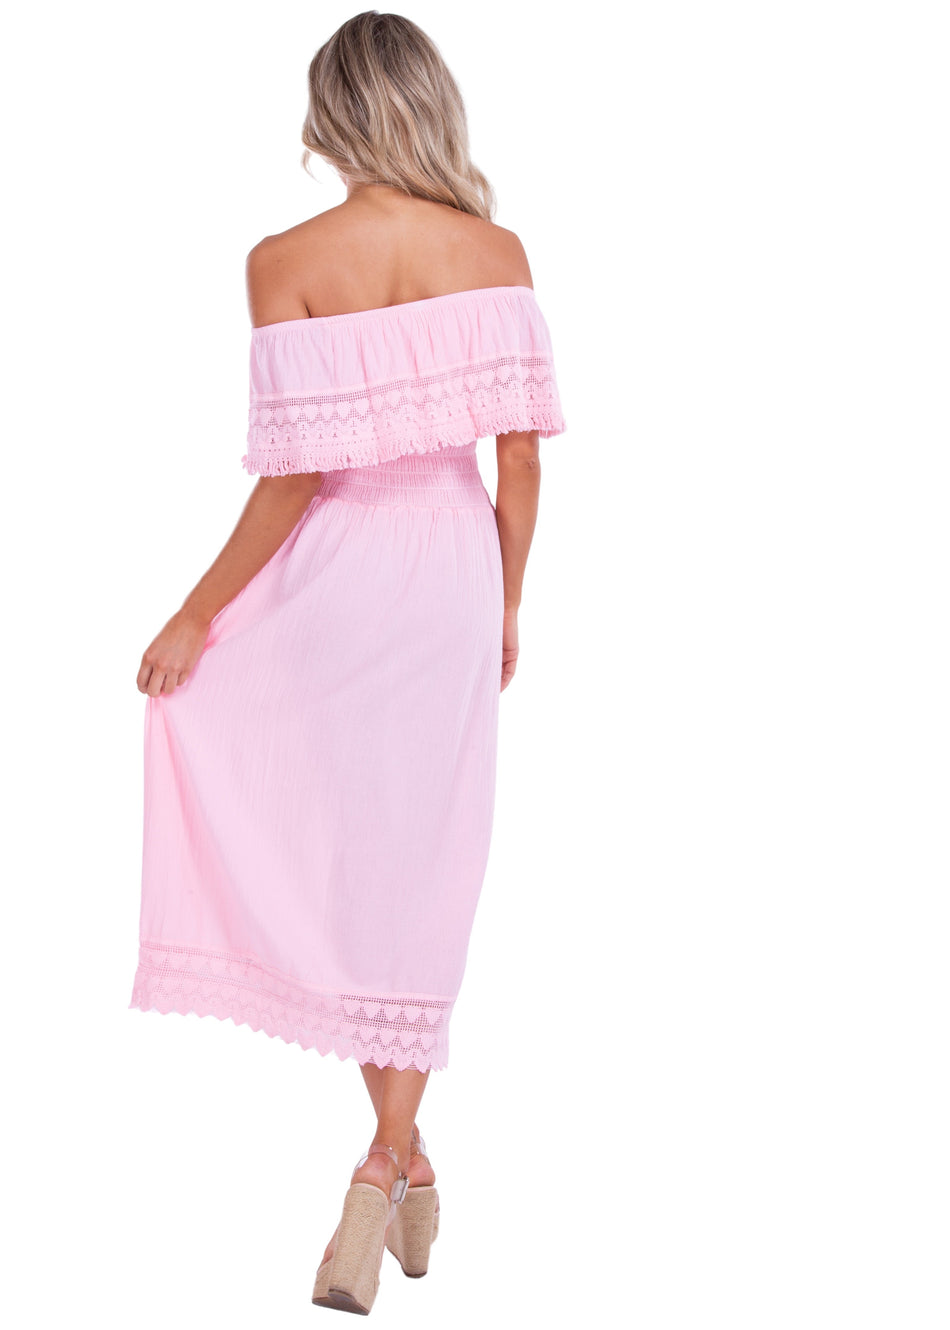 NW1079 - Baby Pink Cotton Dress